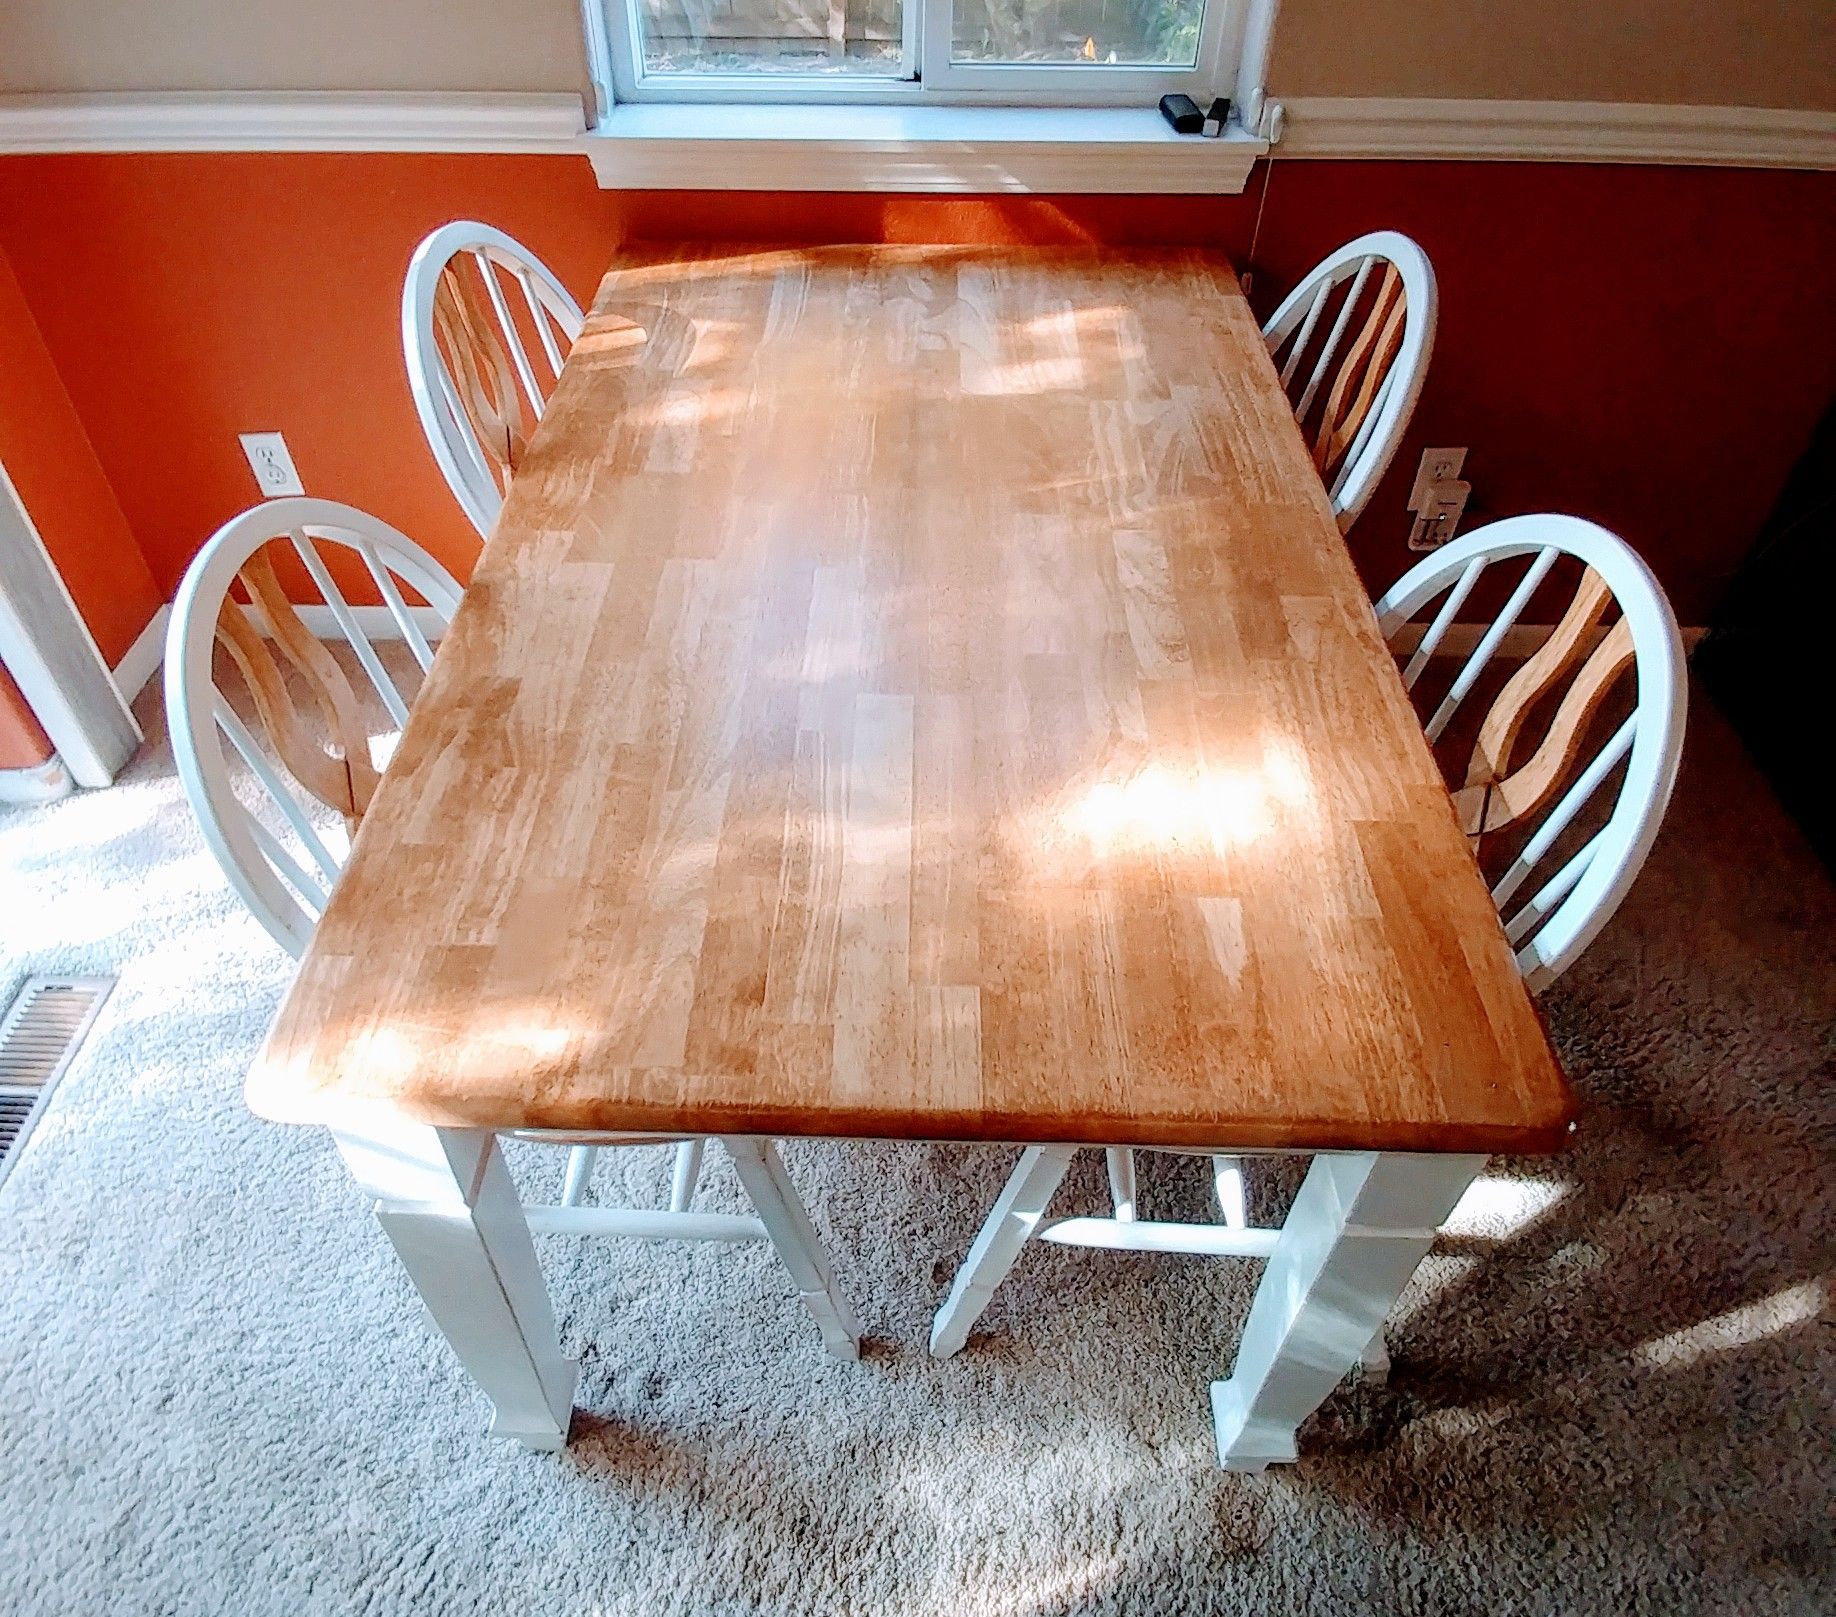 Standard Wooden Table and Chairs